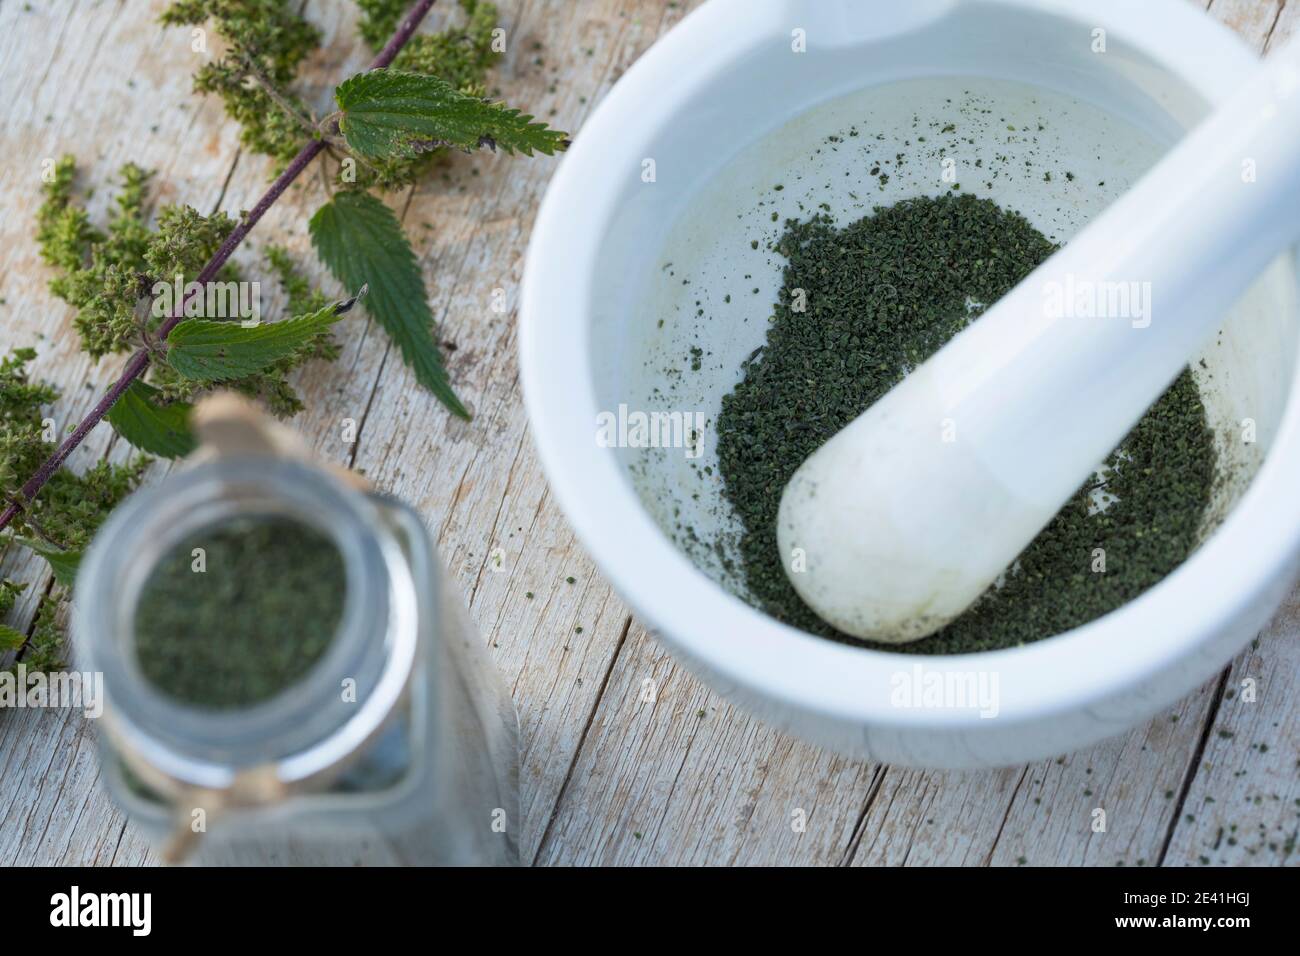 stinging nettle (Urtica dioica), seeds are crushed in a mortar, Germany Stock Photo